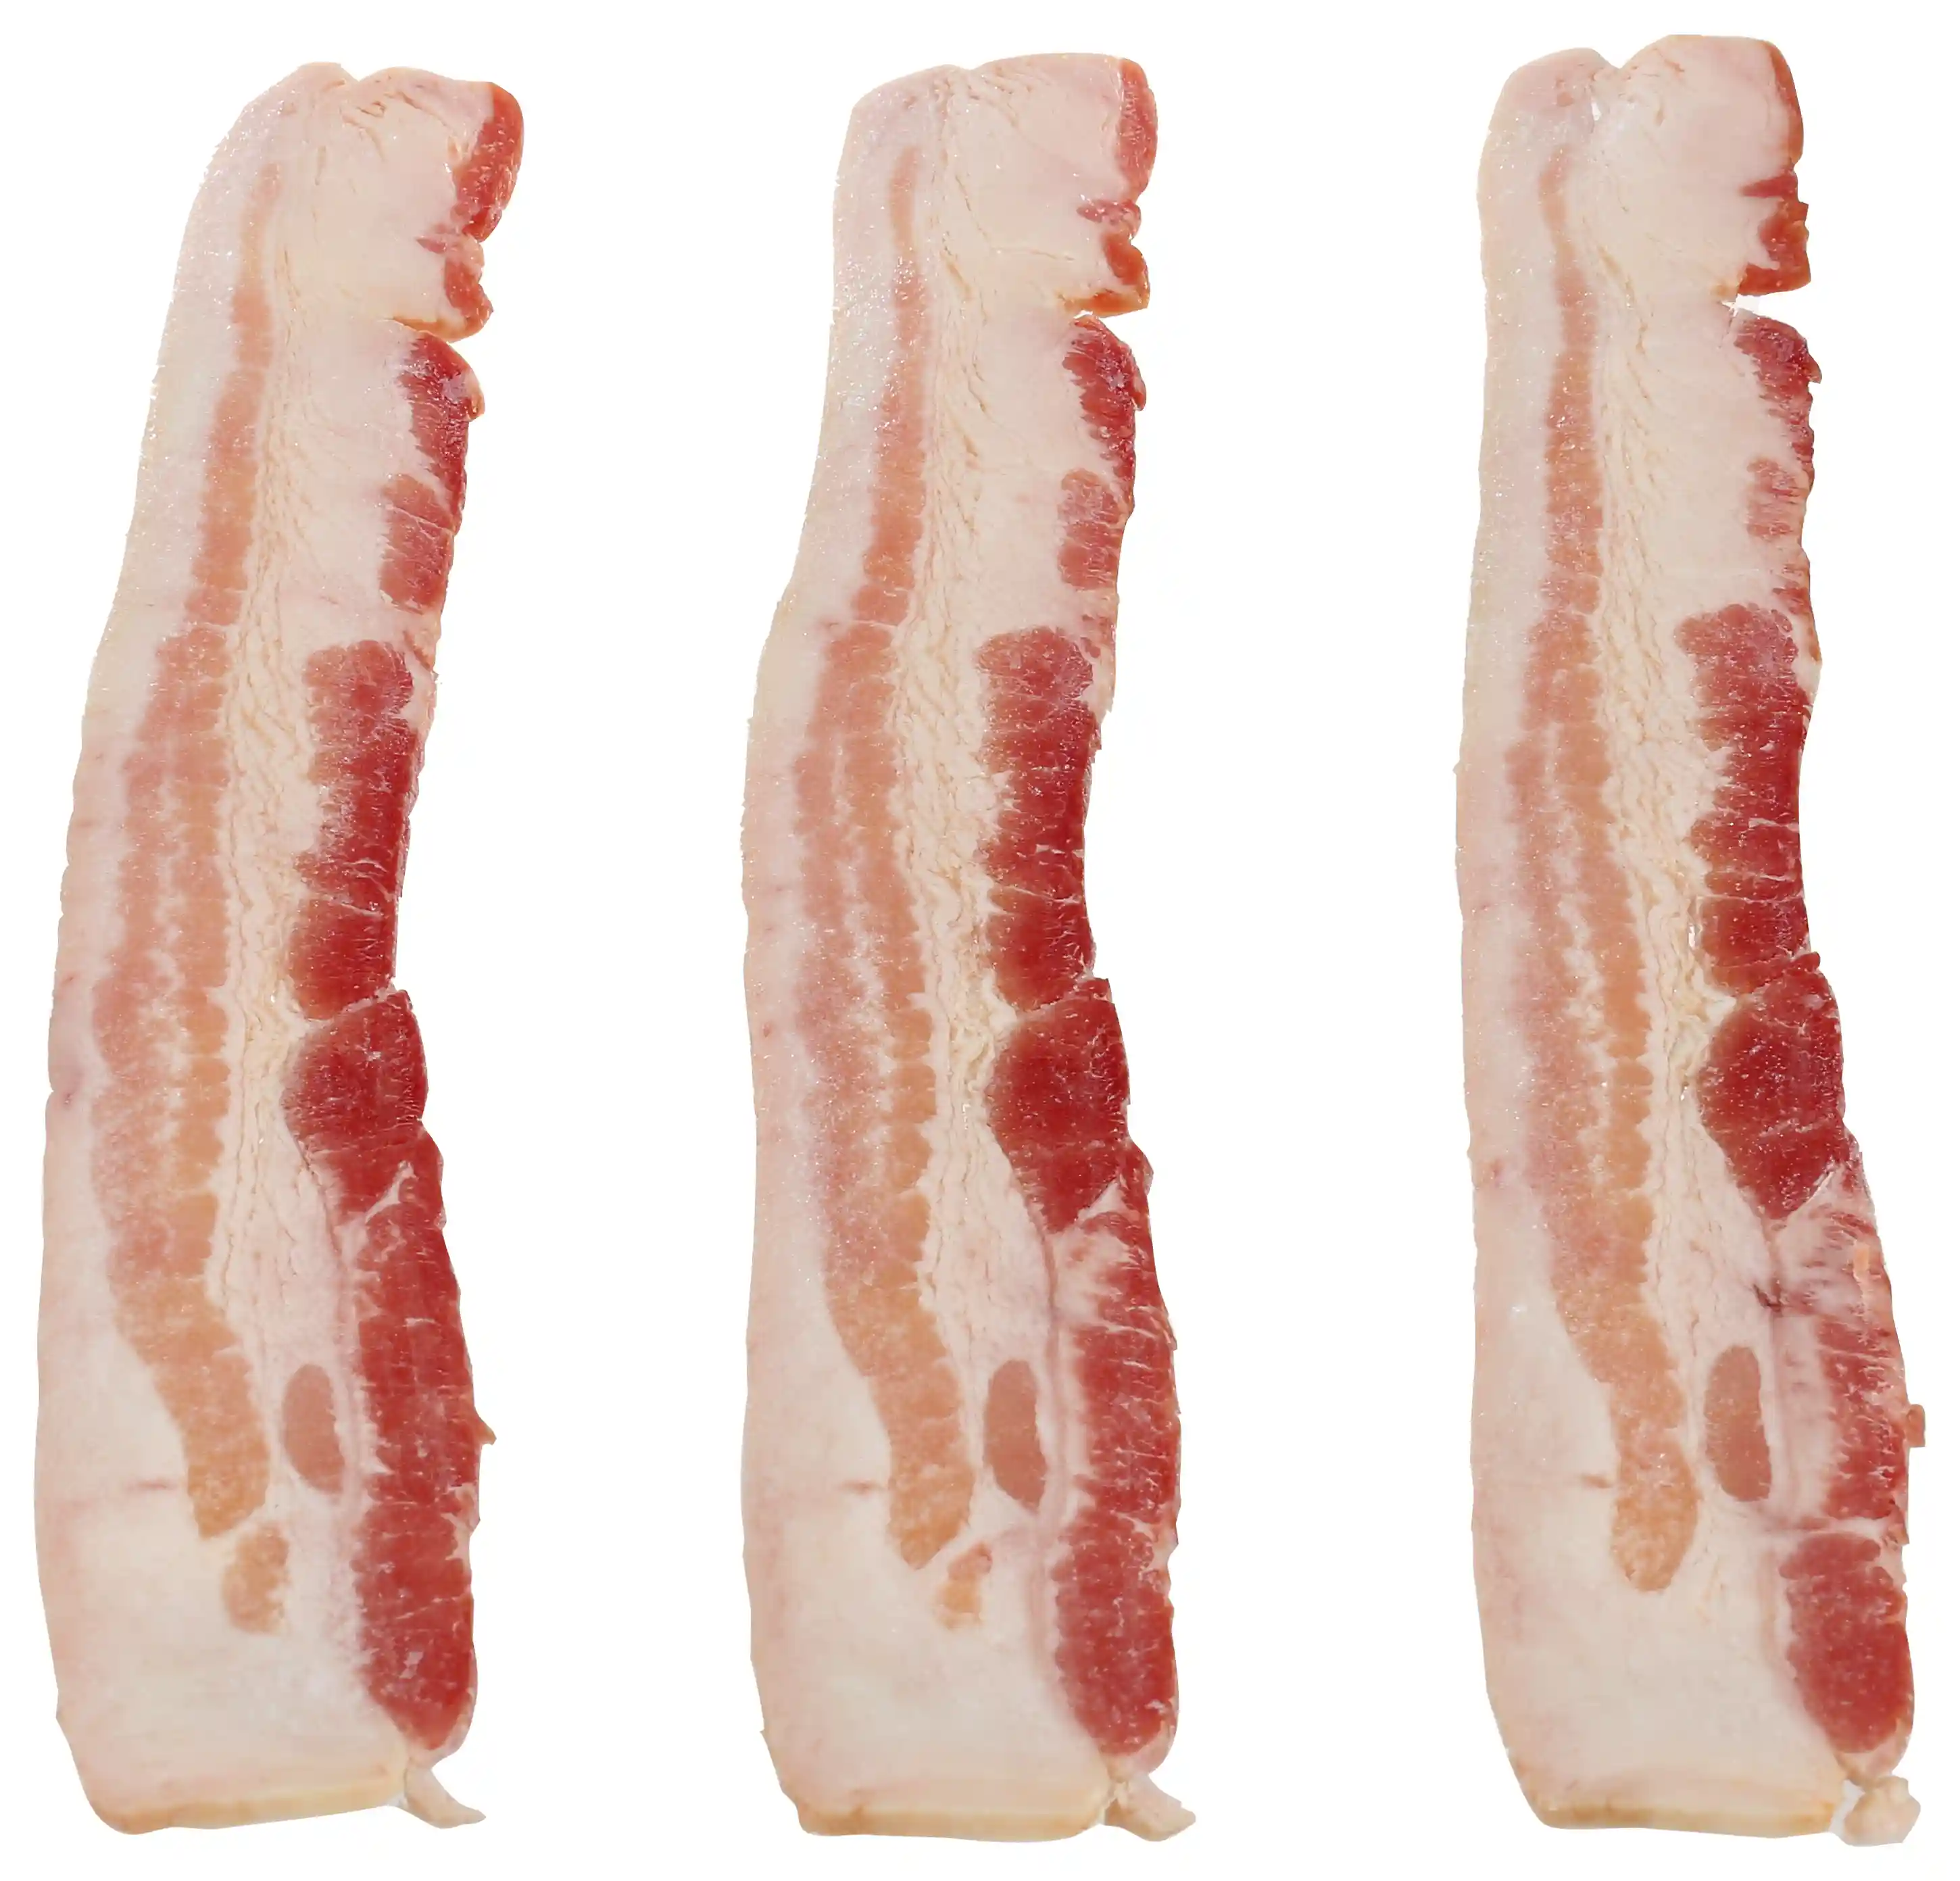 Wright® Brand Naturally Applewood Smoked Regular Sliced Bacon, Flat-Pack®, 15 Lbs, 14-18 Slices per Pound, Frozen_image_21